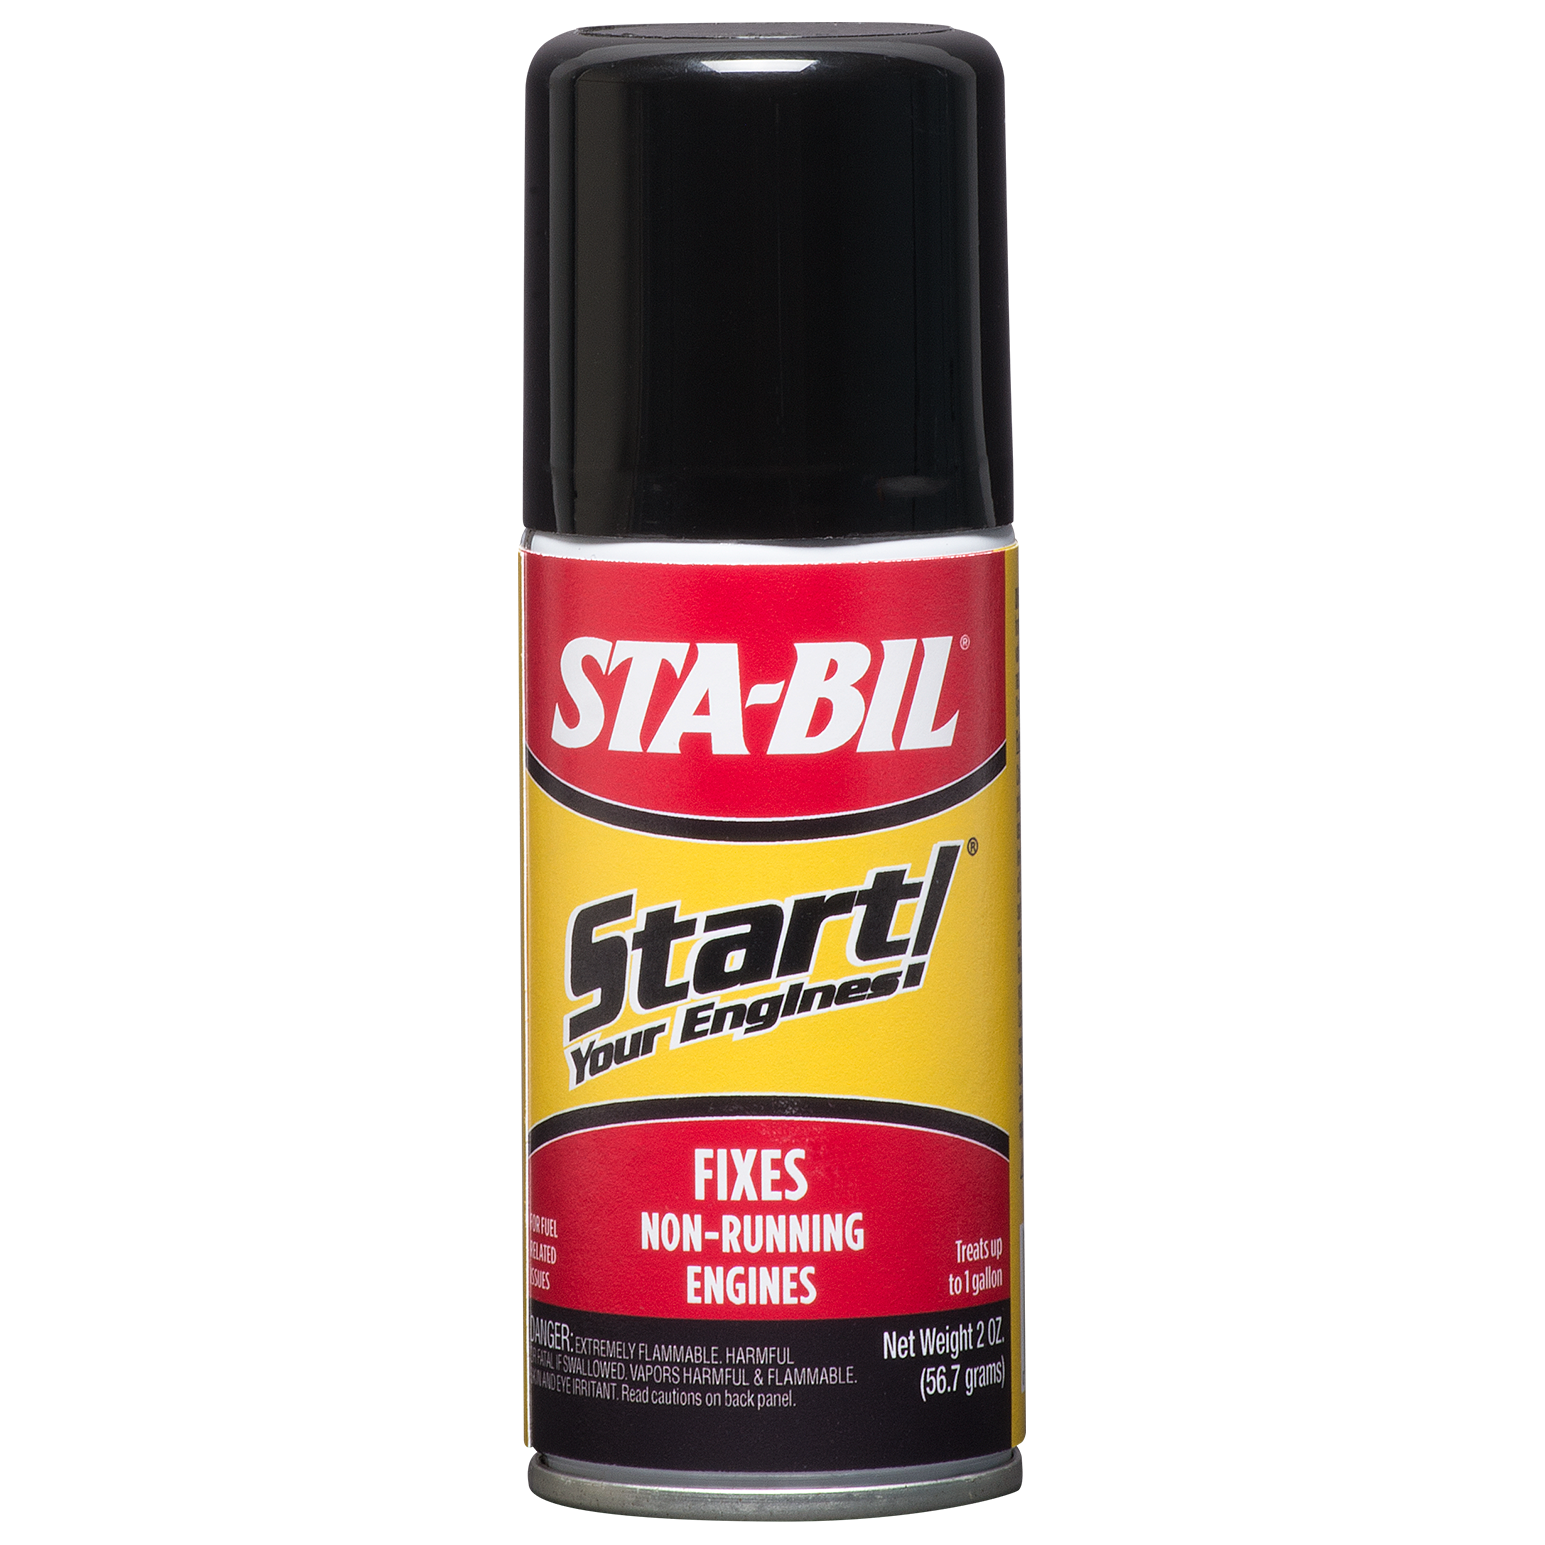 stoom Invloedrijk Tentakel Start Your Engines! 2 oz. 2-cycle Or 4-cycle Engines Fuel Additive in the  Fuel Additives department at Lowes.com